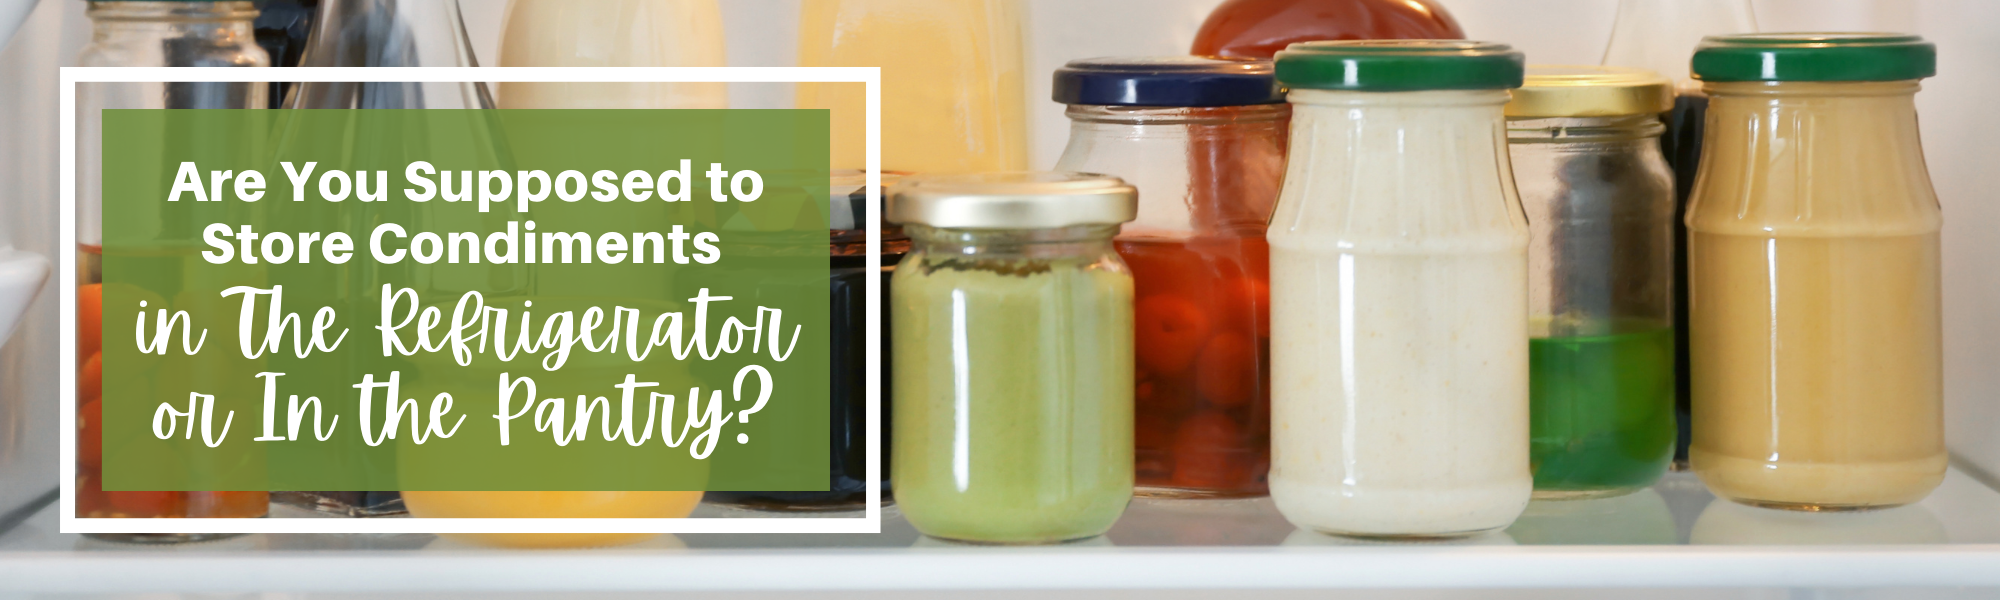 Store Condiments in the Refrigerator or Pantry?